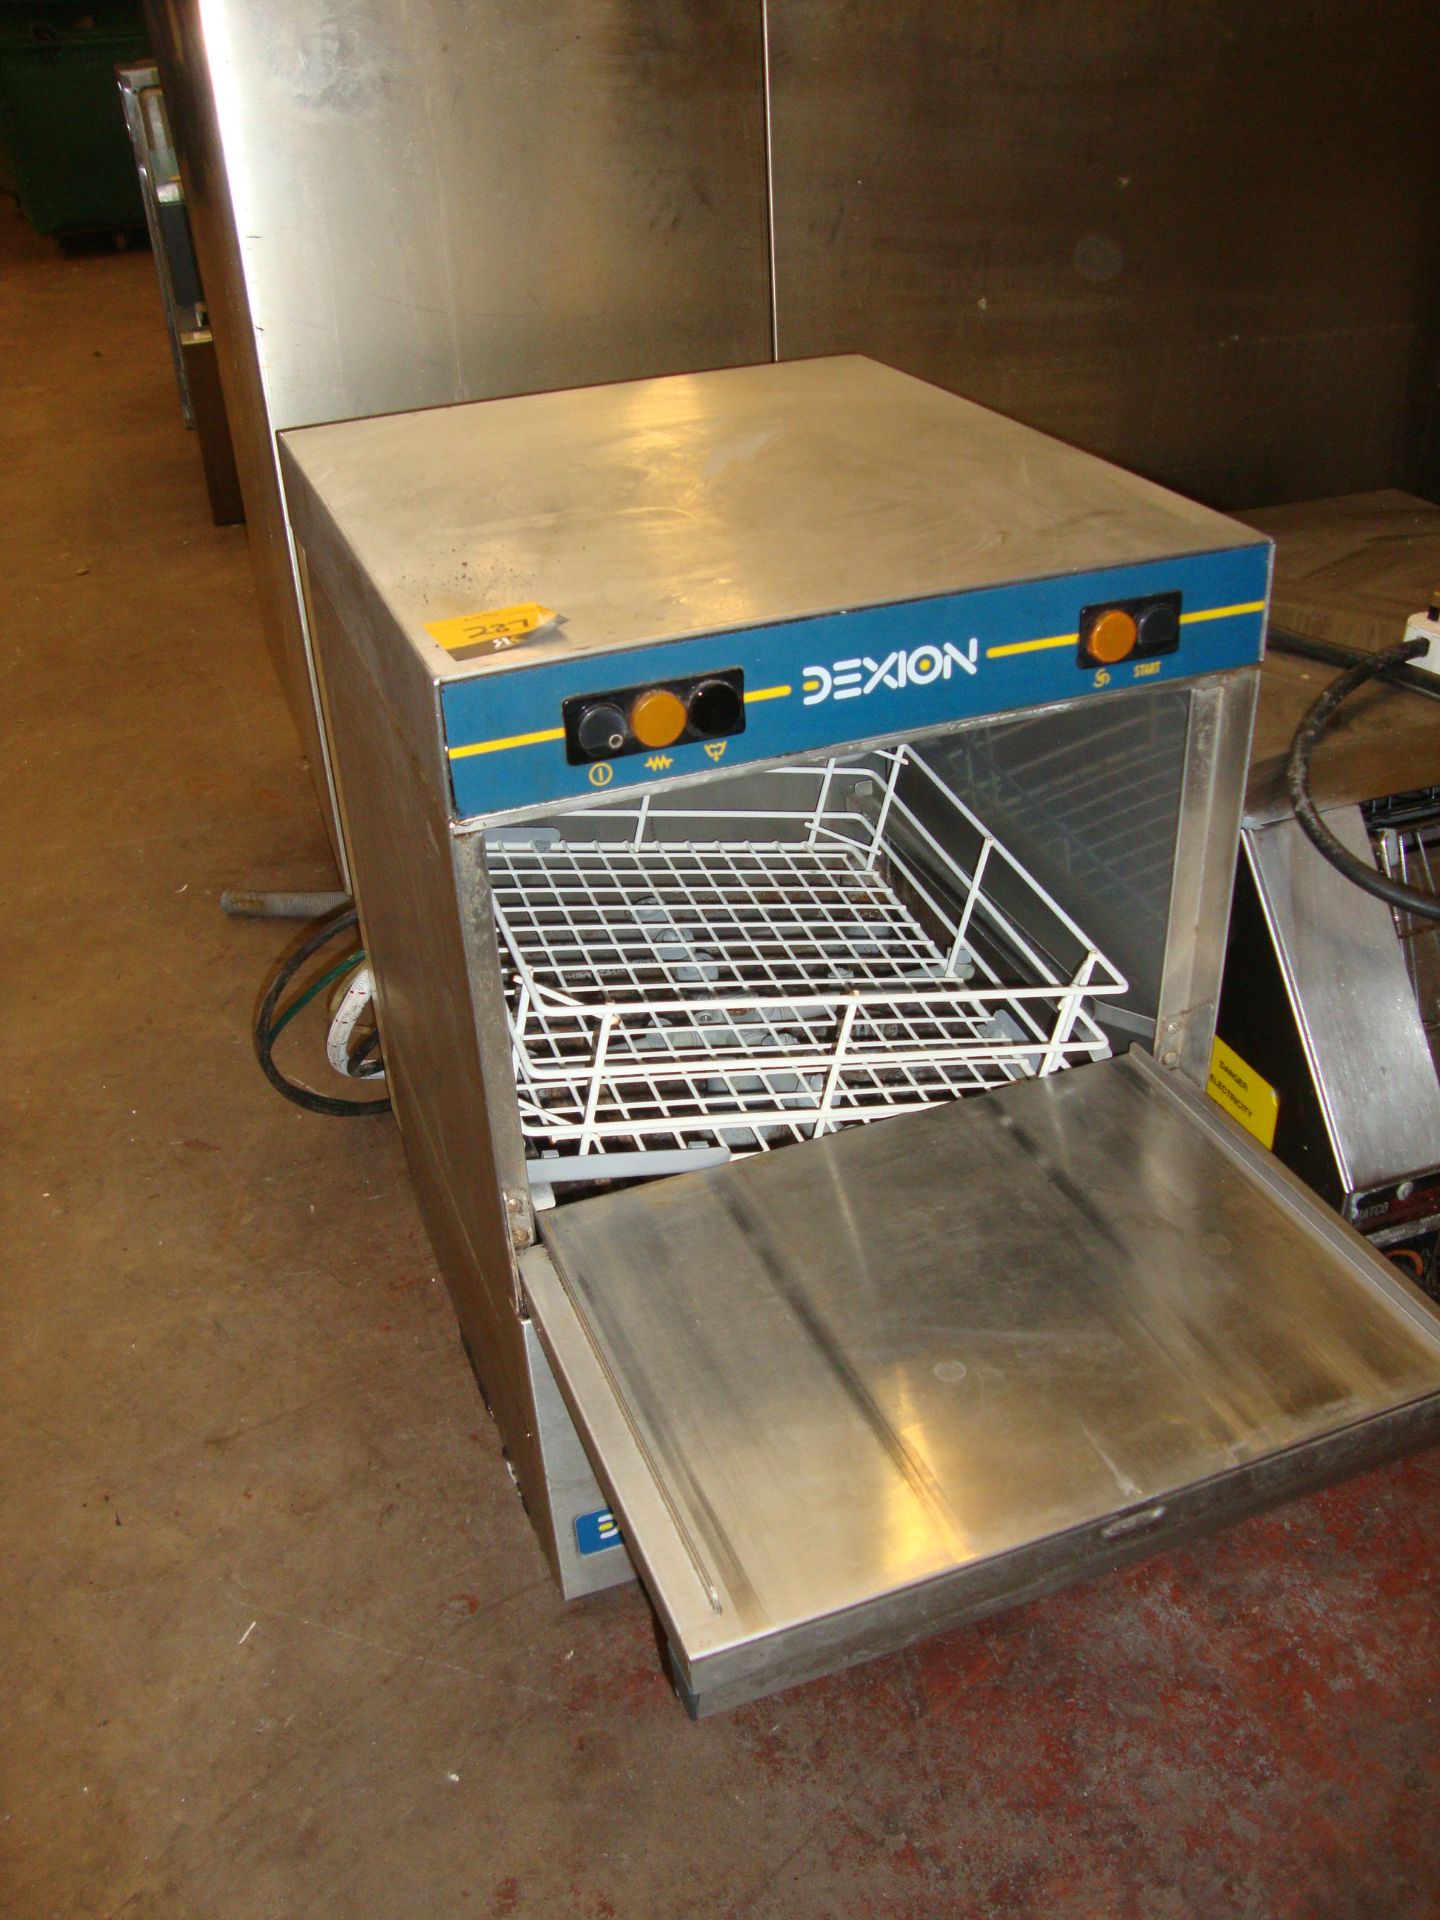 Dexion compact glass washer - Image 2 of 2